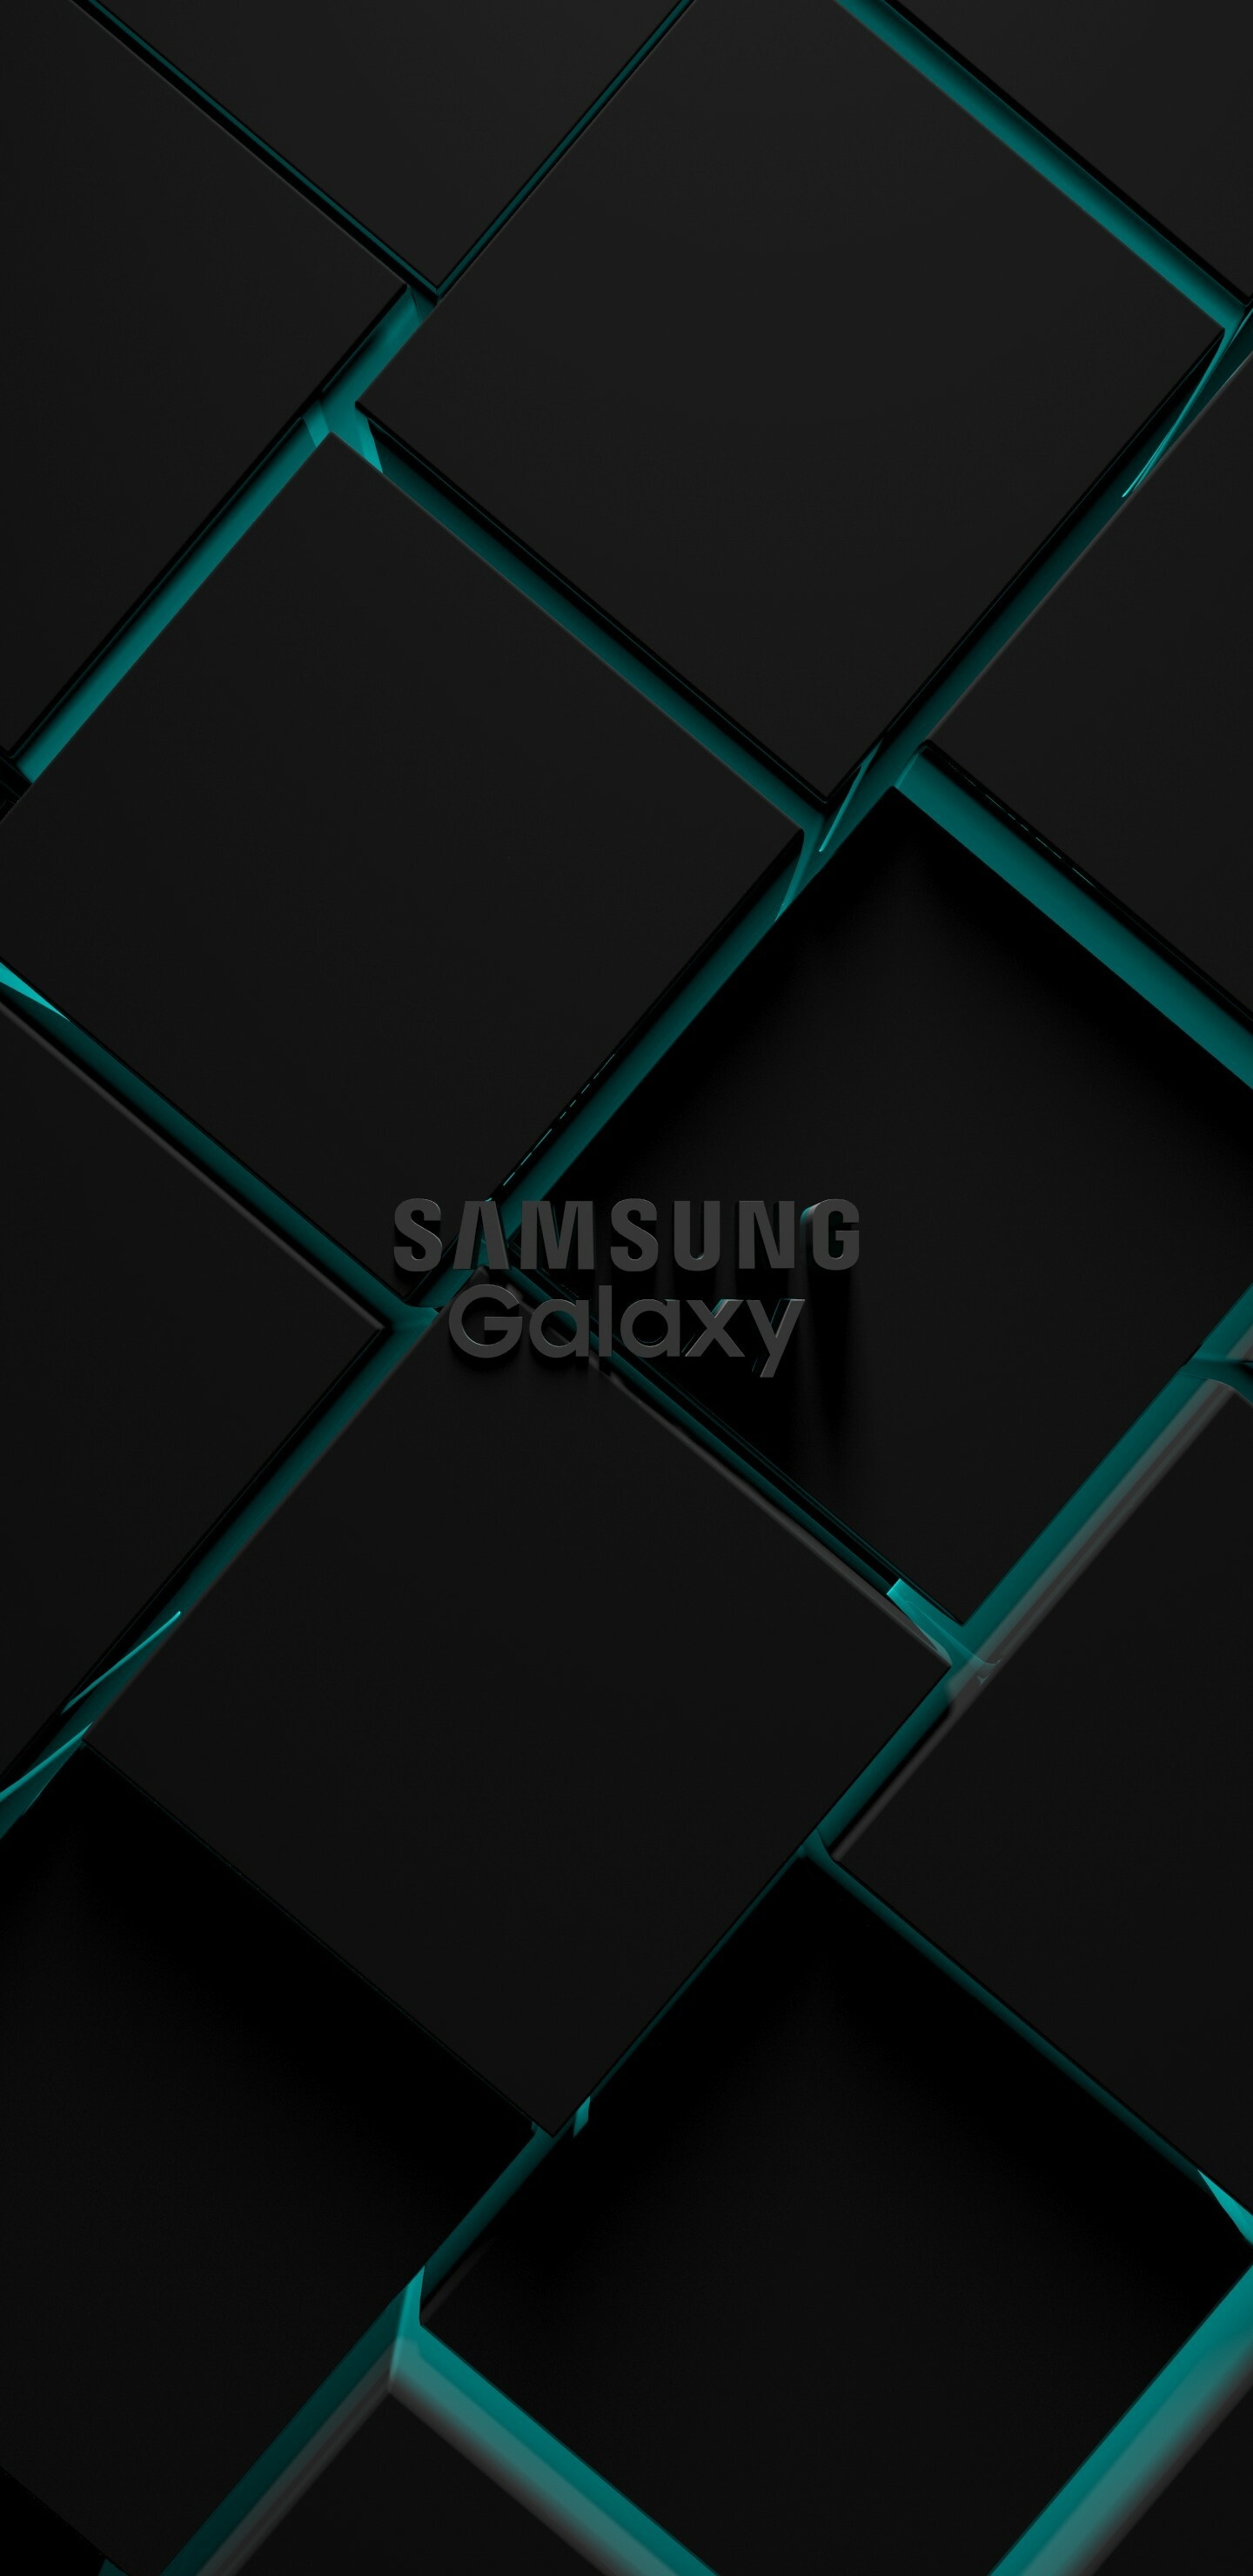 Samsung: The flagship smartphones, The Galaxy S, A line of high-end devices. 1440x2960 HD Background.